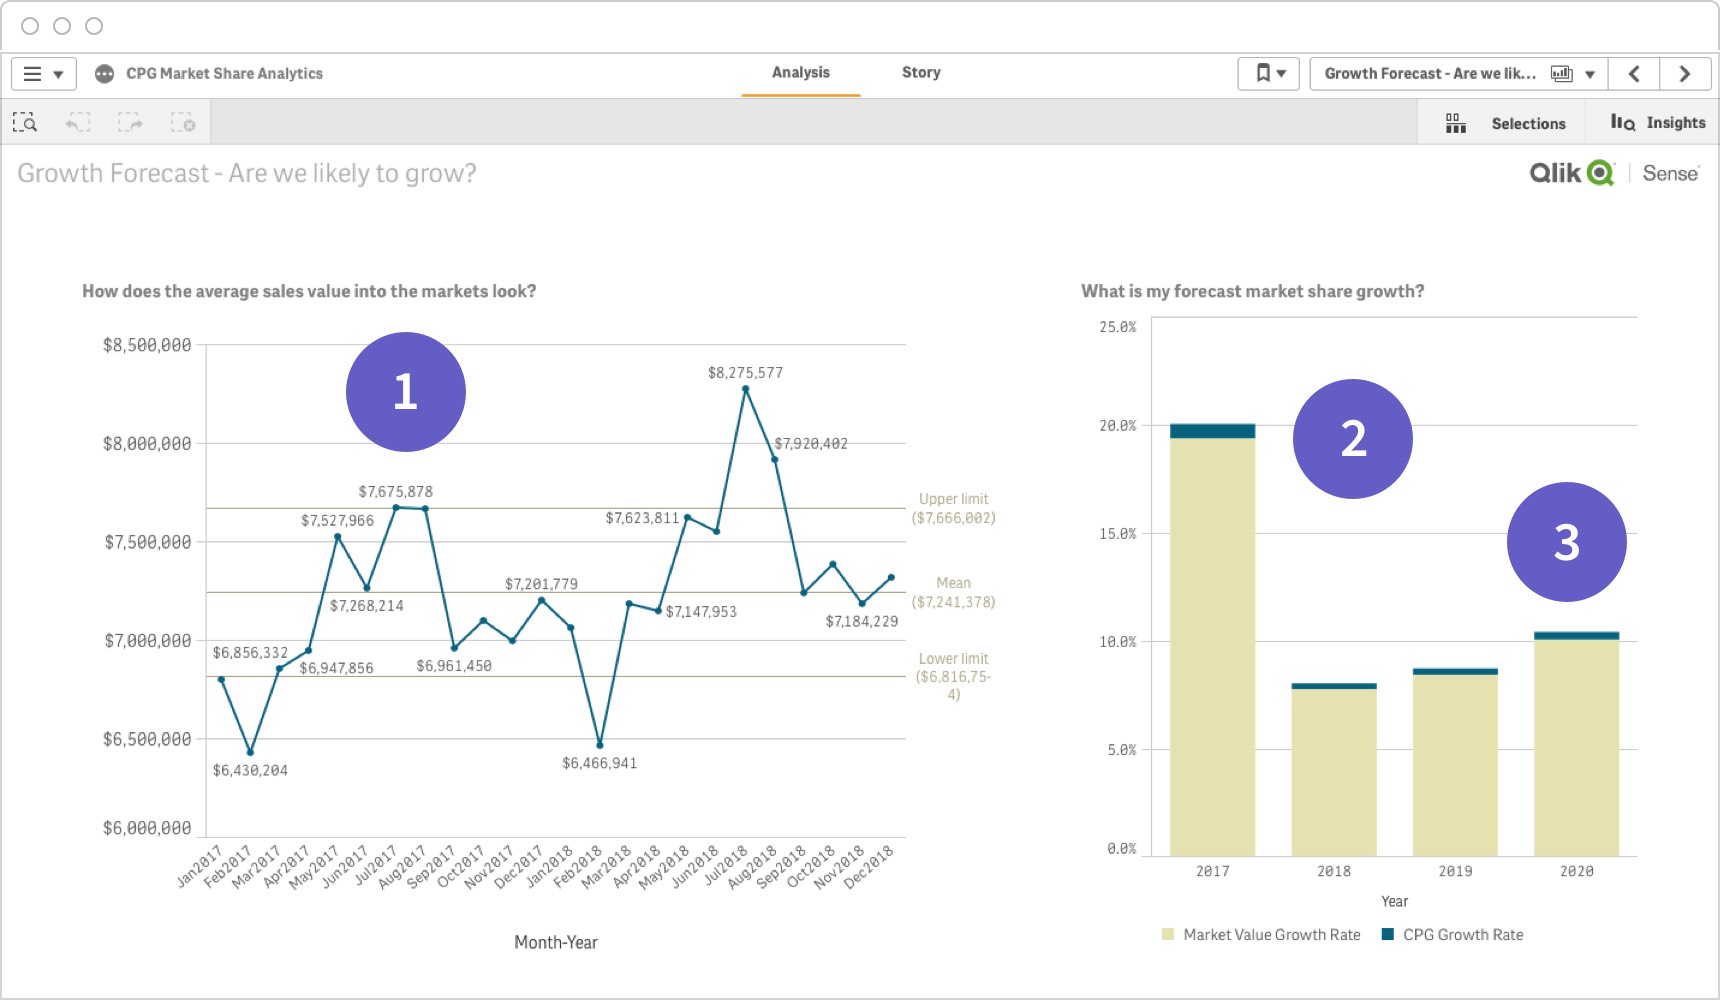 A Qlik Sense analytical dashboard design demonstration of interactive analysis, forecasts and comparison data.